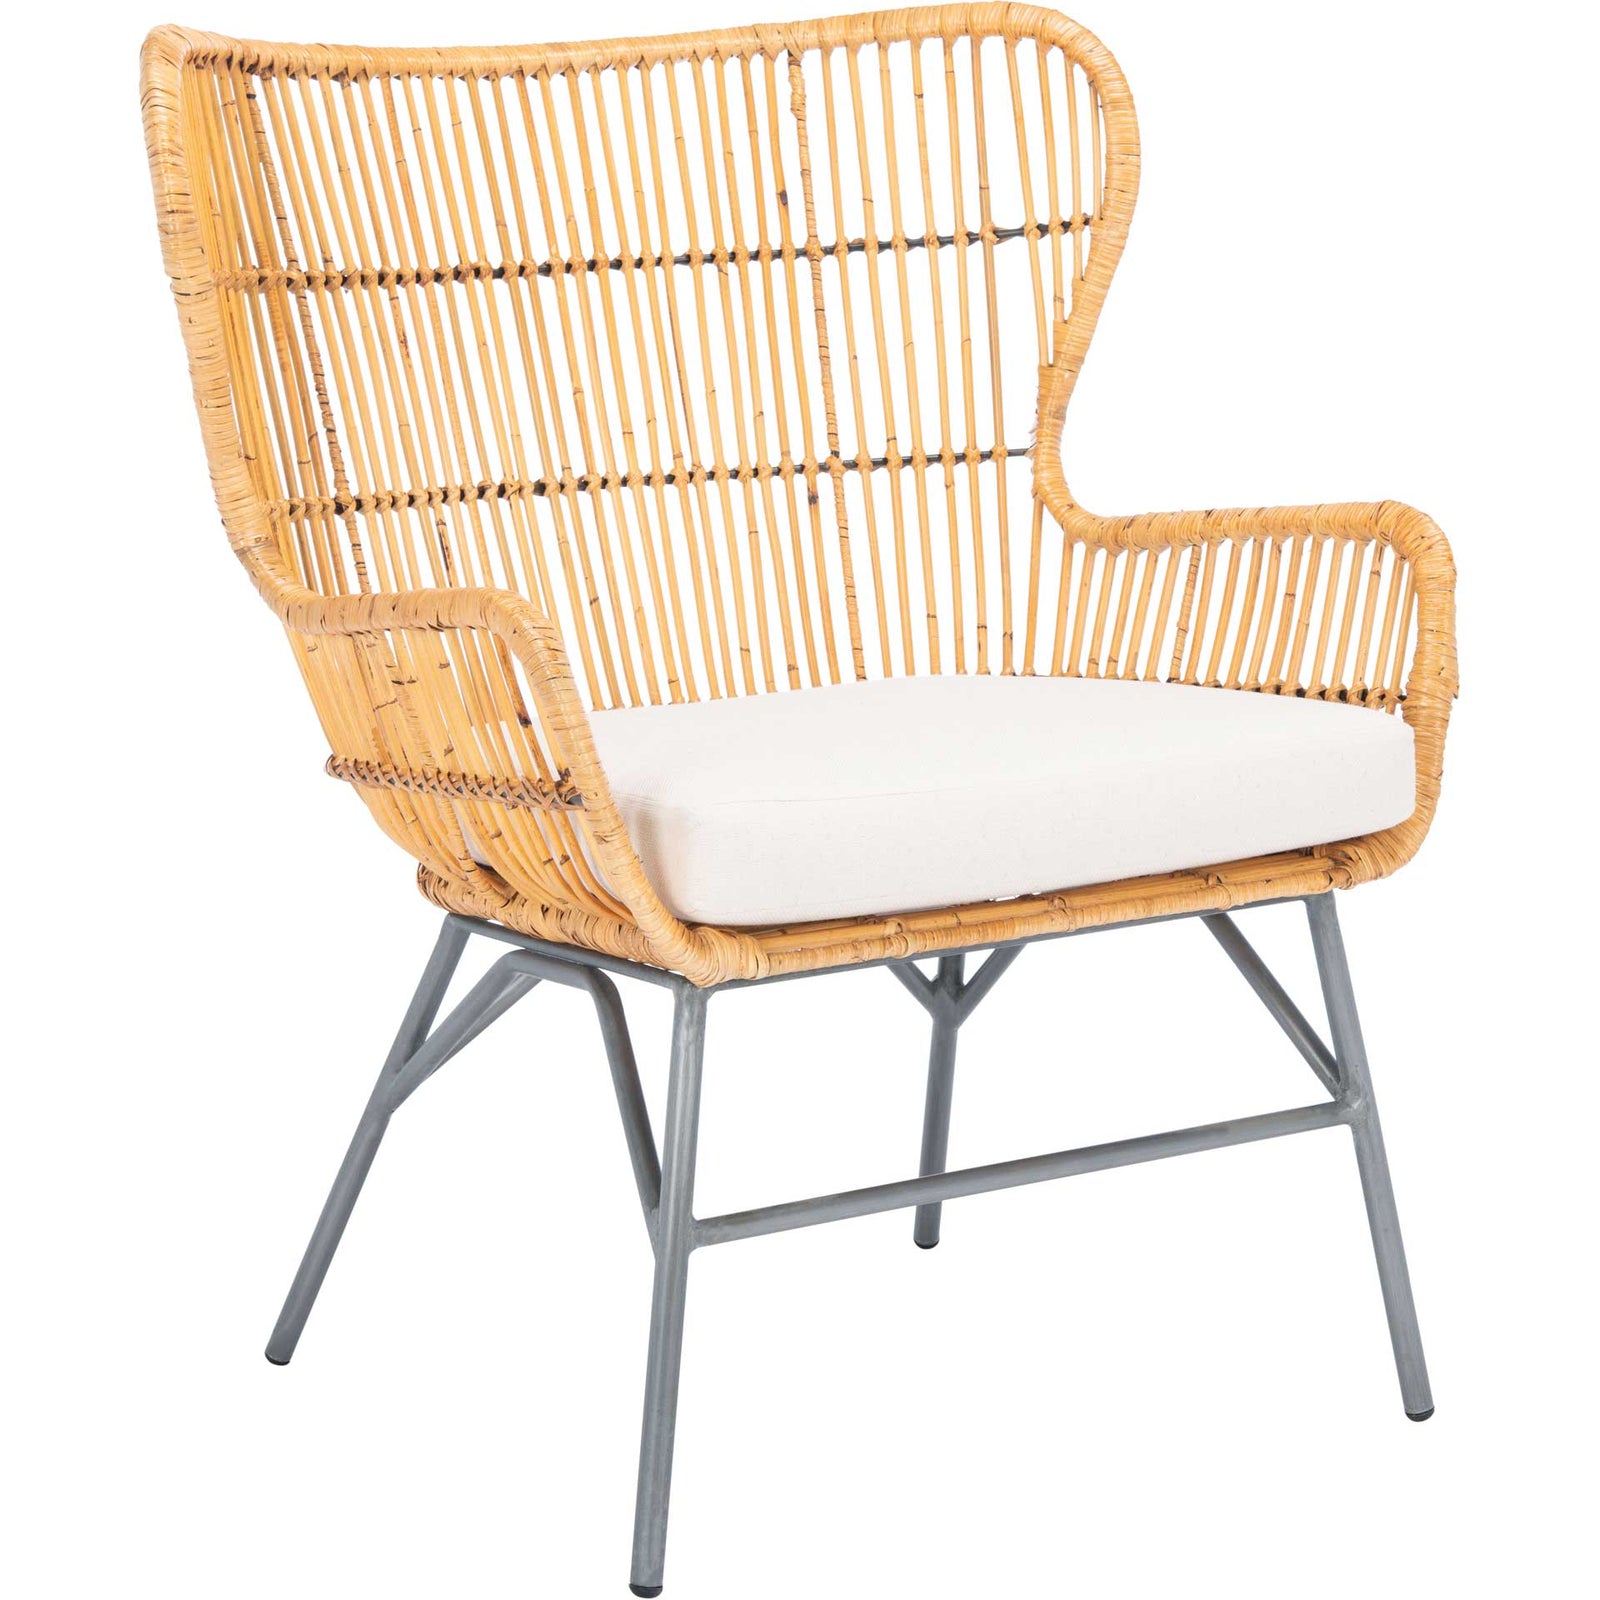 Leary Rattan Accent Chair Natural/White/Black